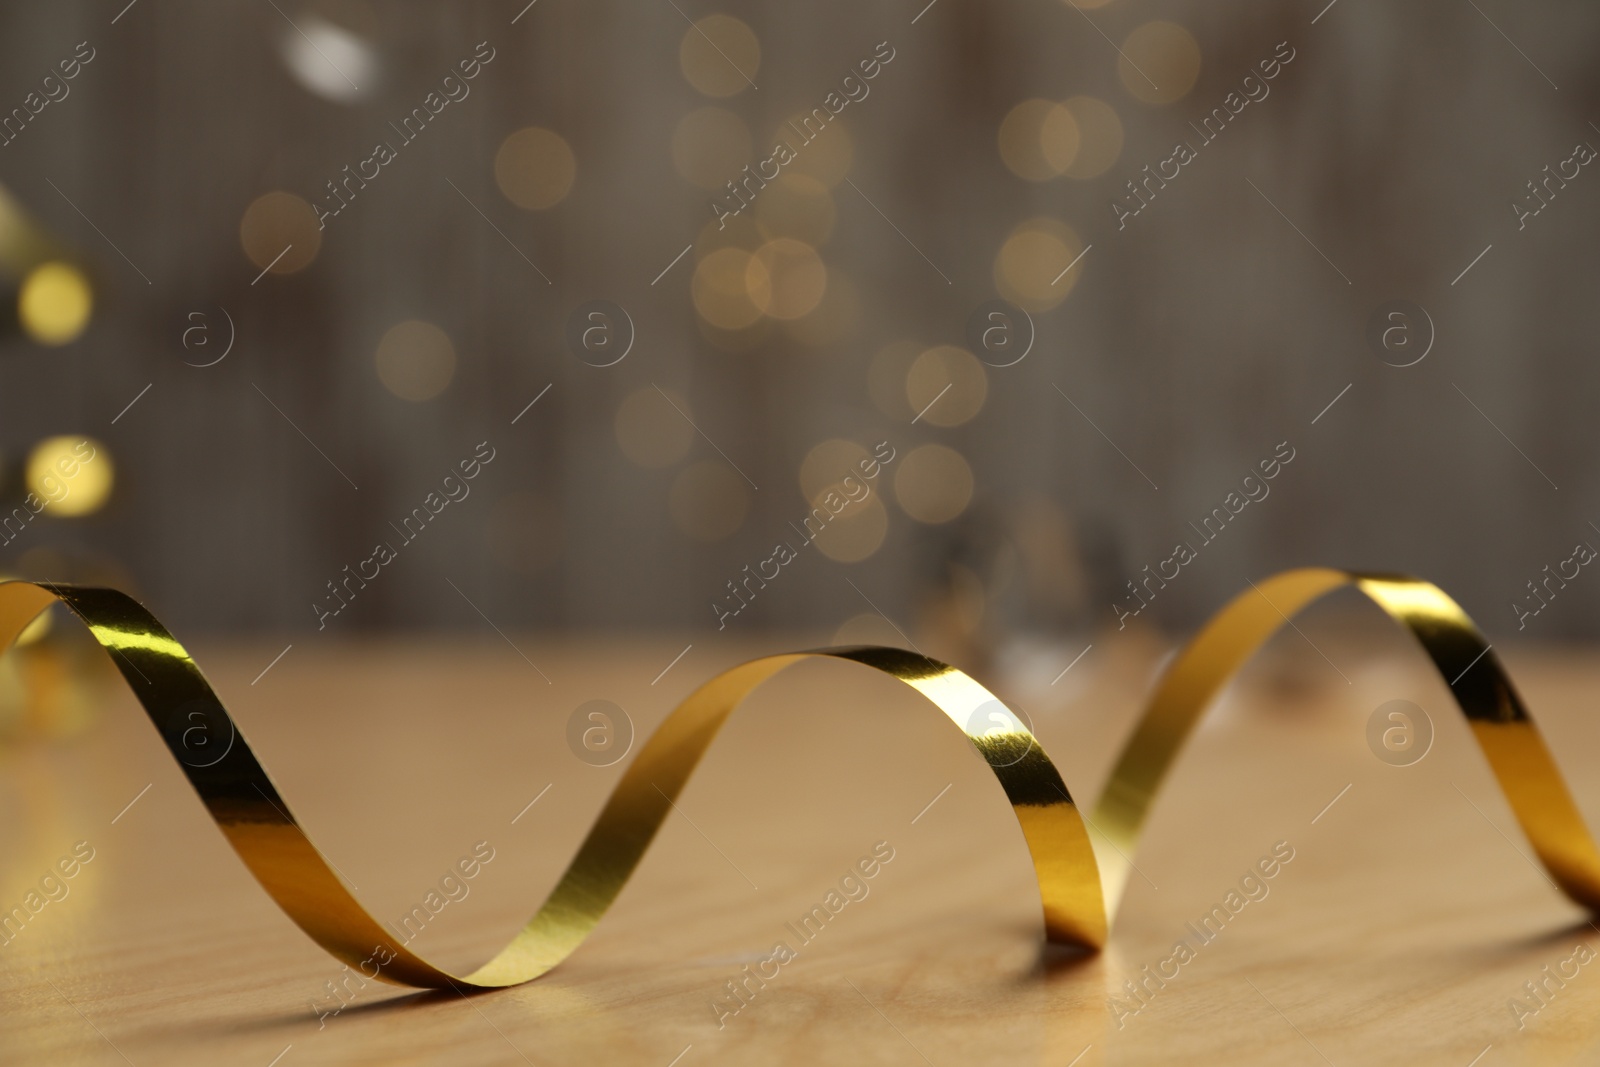 Photo of Shiny golden serpentine streamer on wooden table against blurred lights, closeup. Space for text